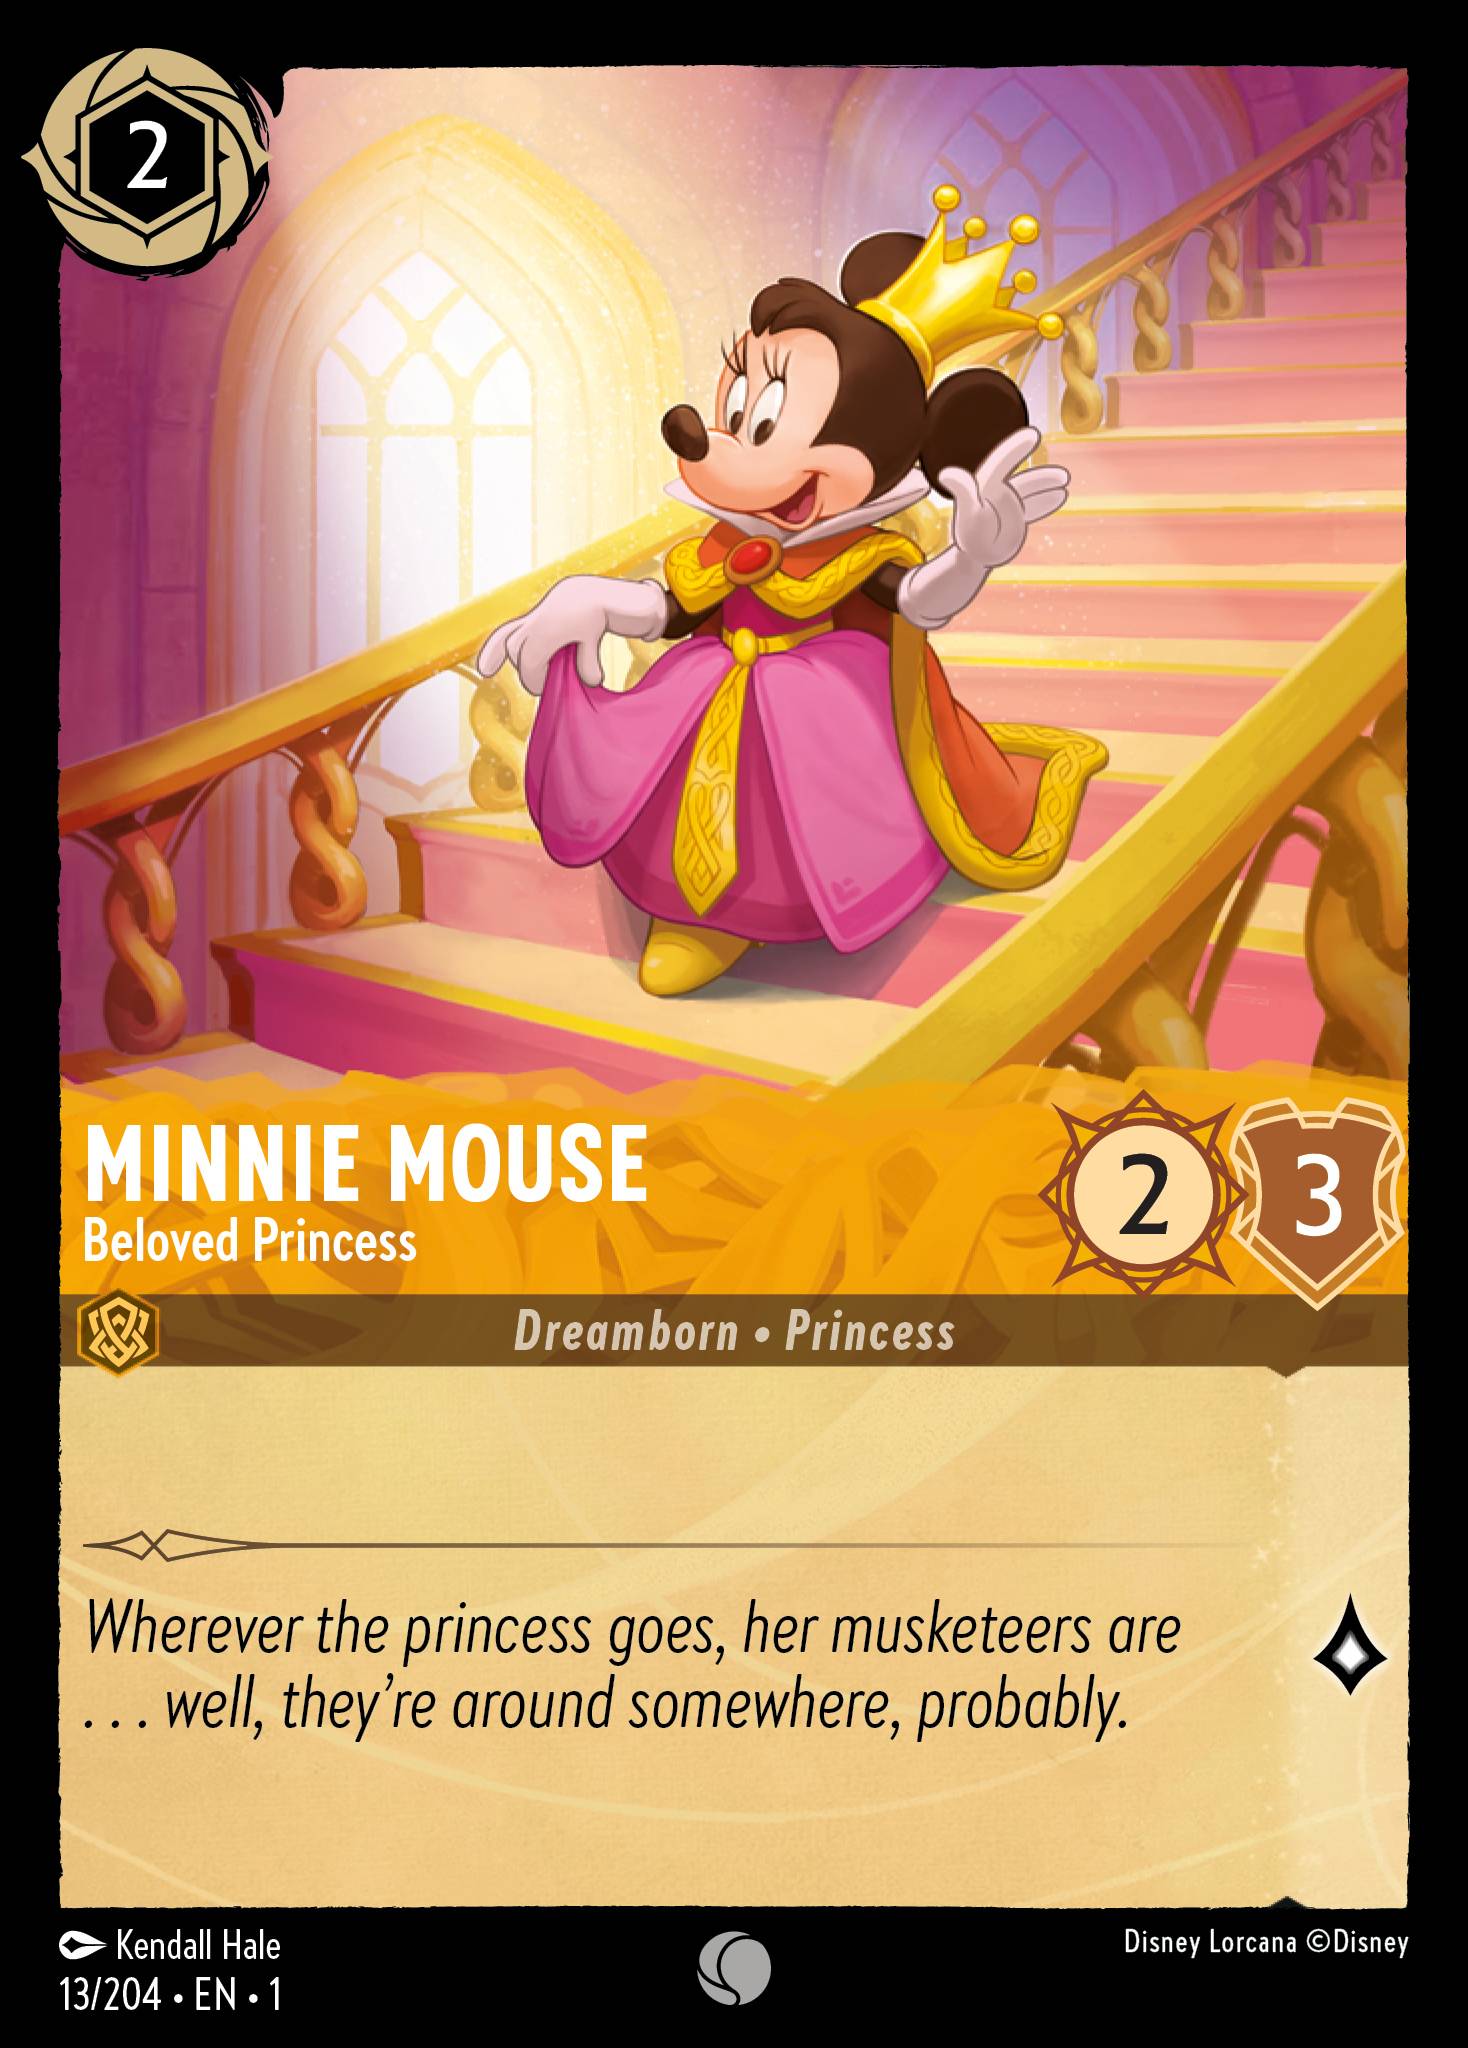 Minnie Mouse - Beloved Princess normal